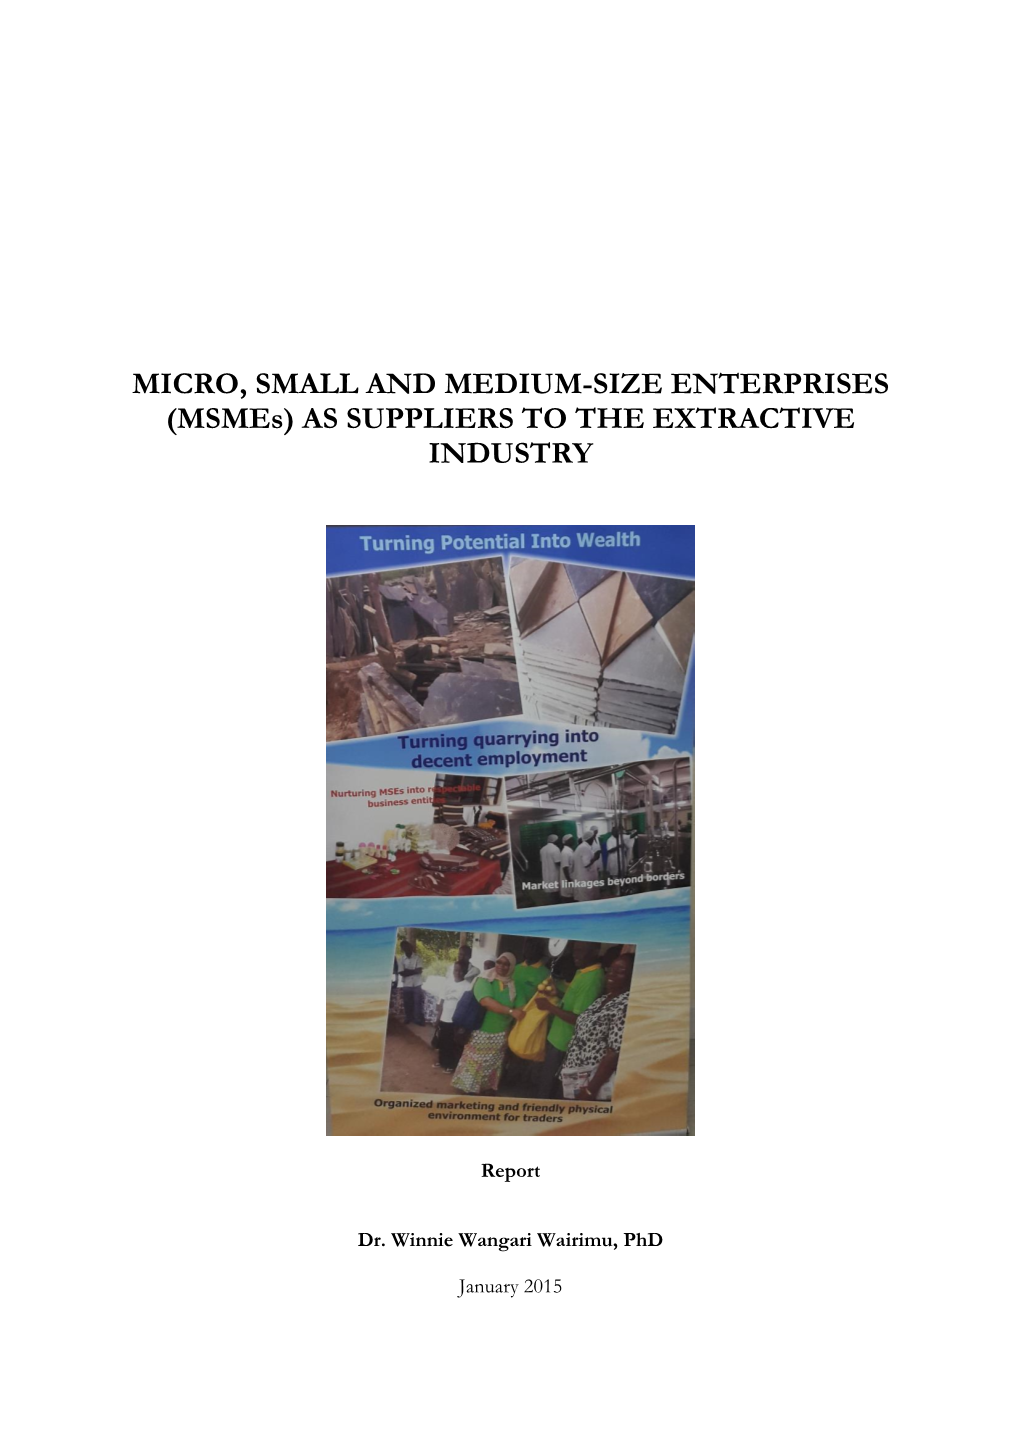 (Msmes) AS SUPPLIERS to the EXTRACTIVE INDUSTRY